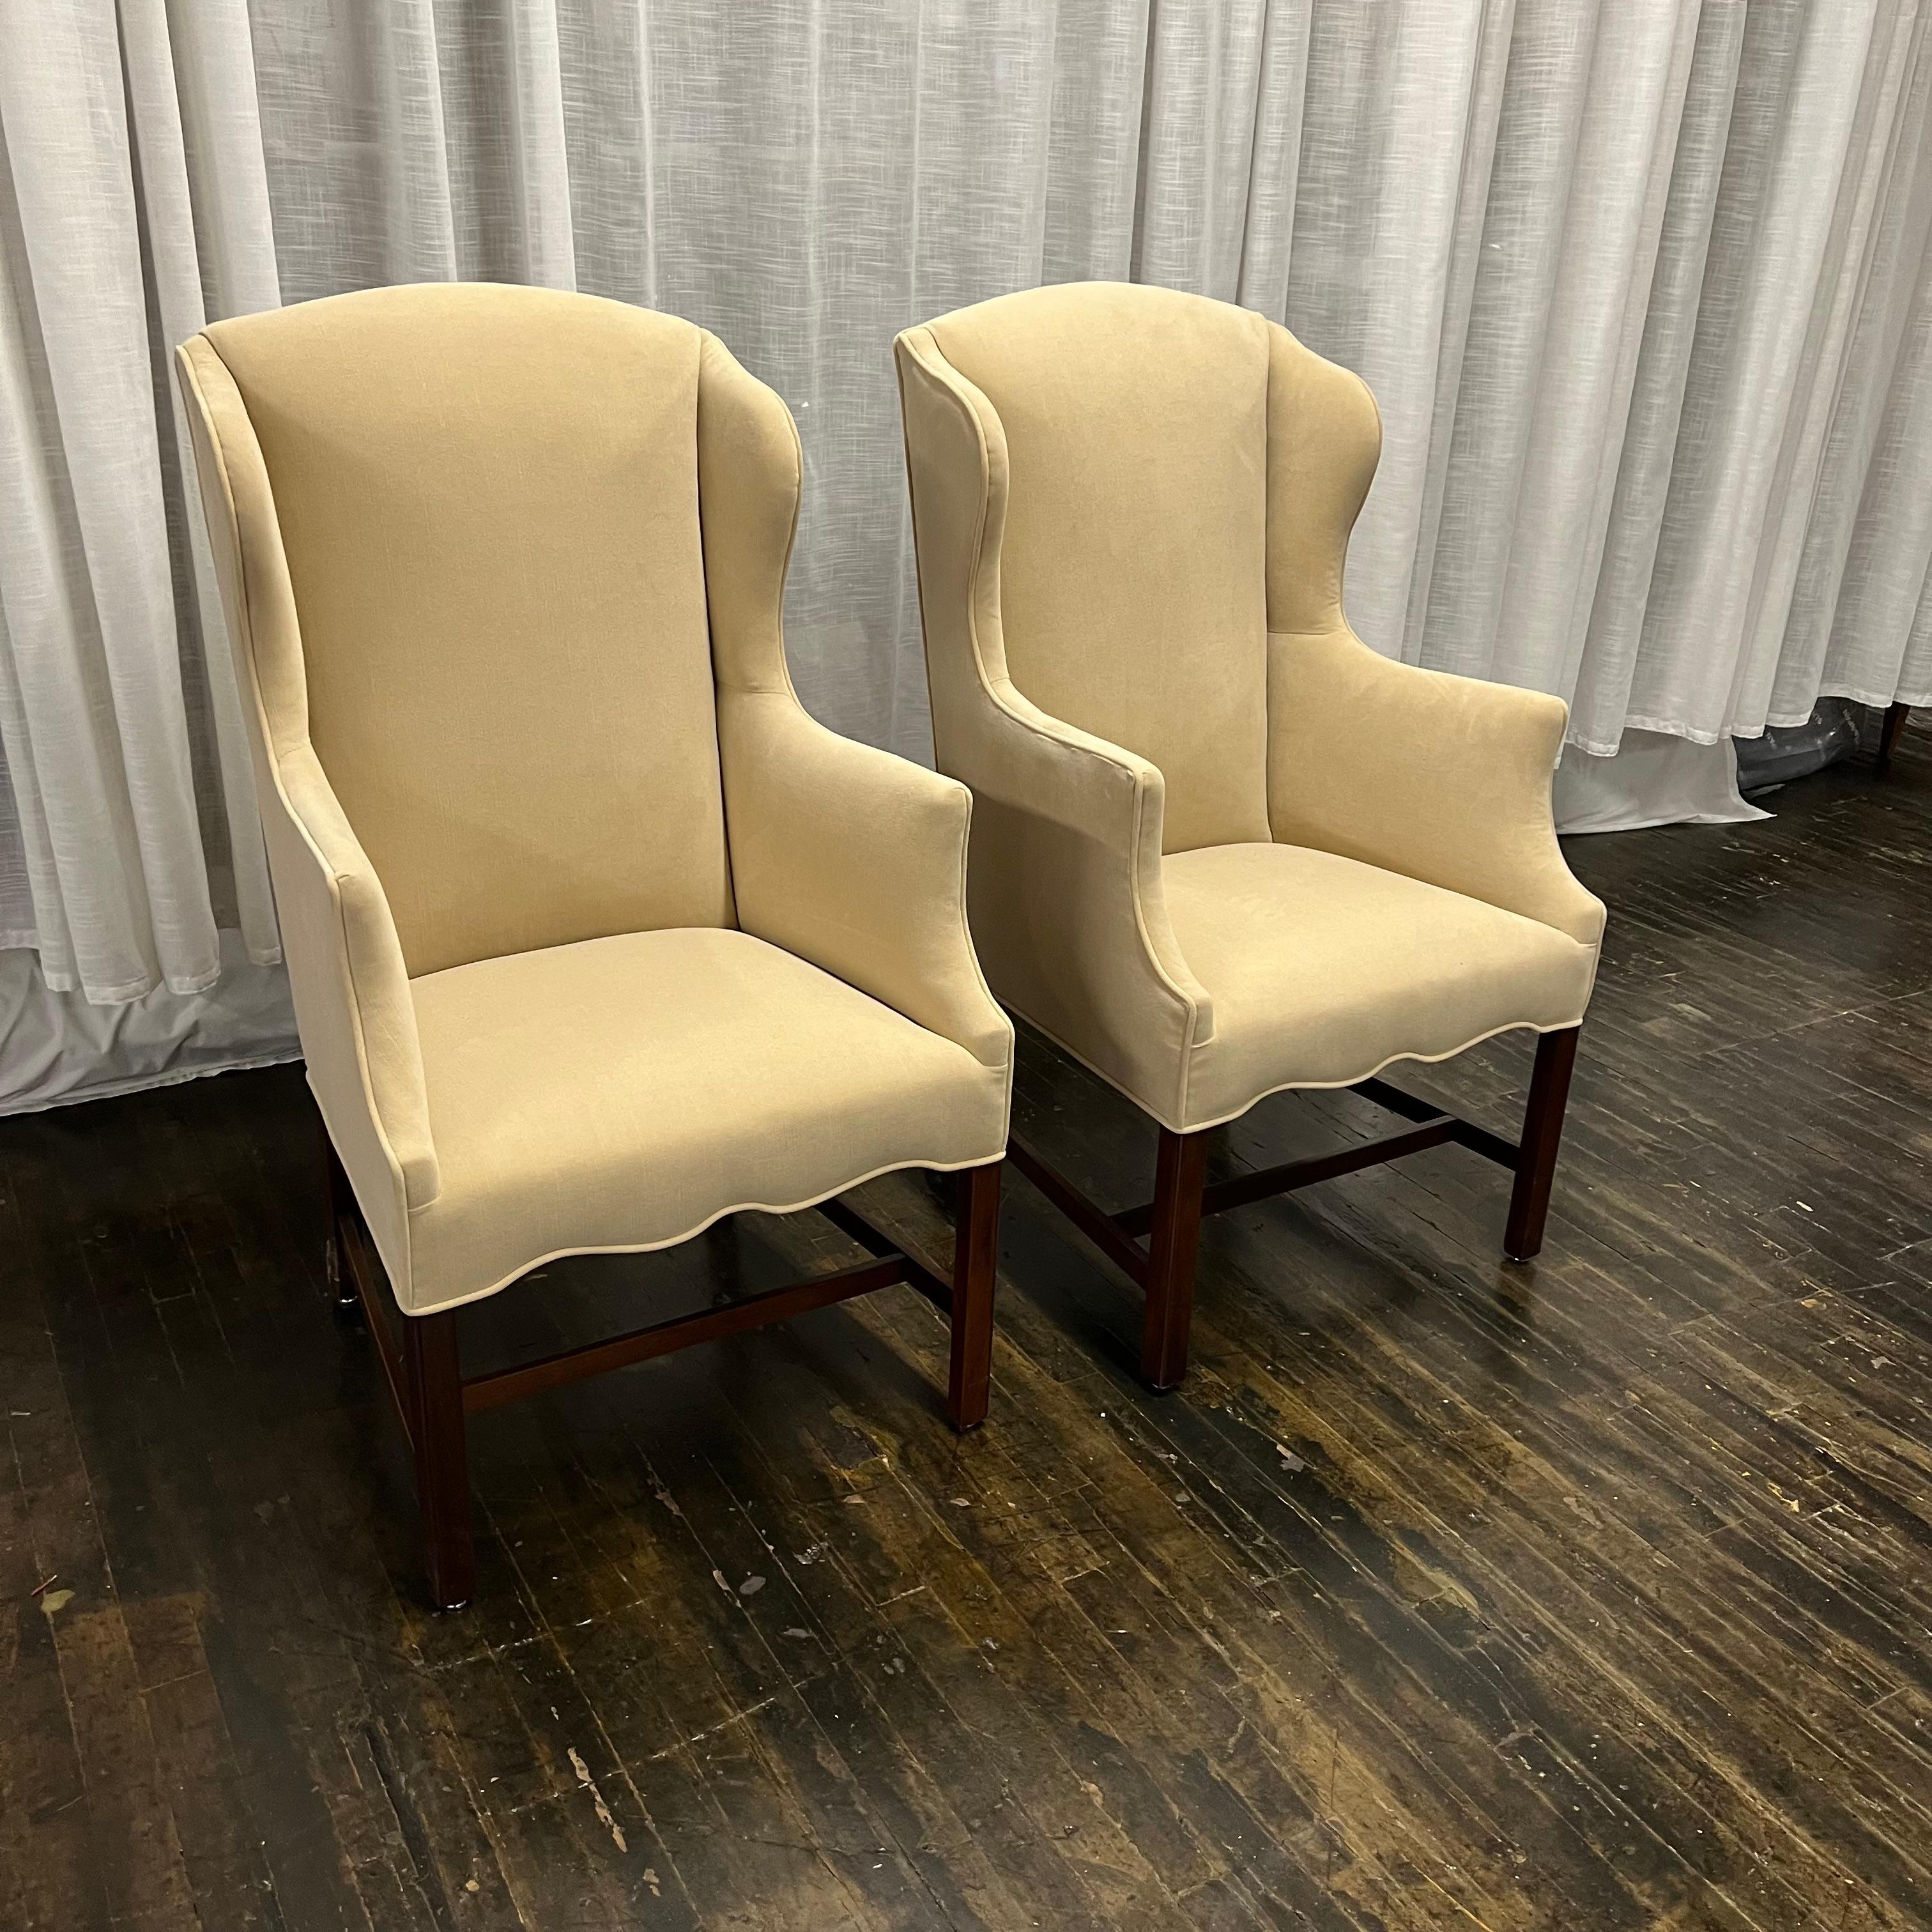 Recently reupholstered Chippendale style midcentury slim wing back chairs made by Hickory Chair. The original label was lost during reupholstery. They have a lovely scallop detail at the front and strong clean lines. They are a great size - not too